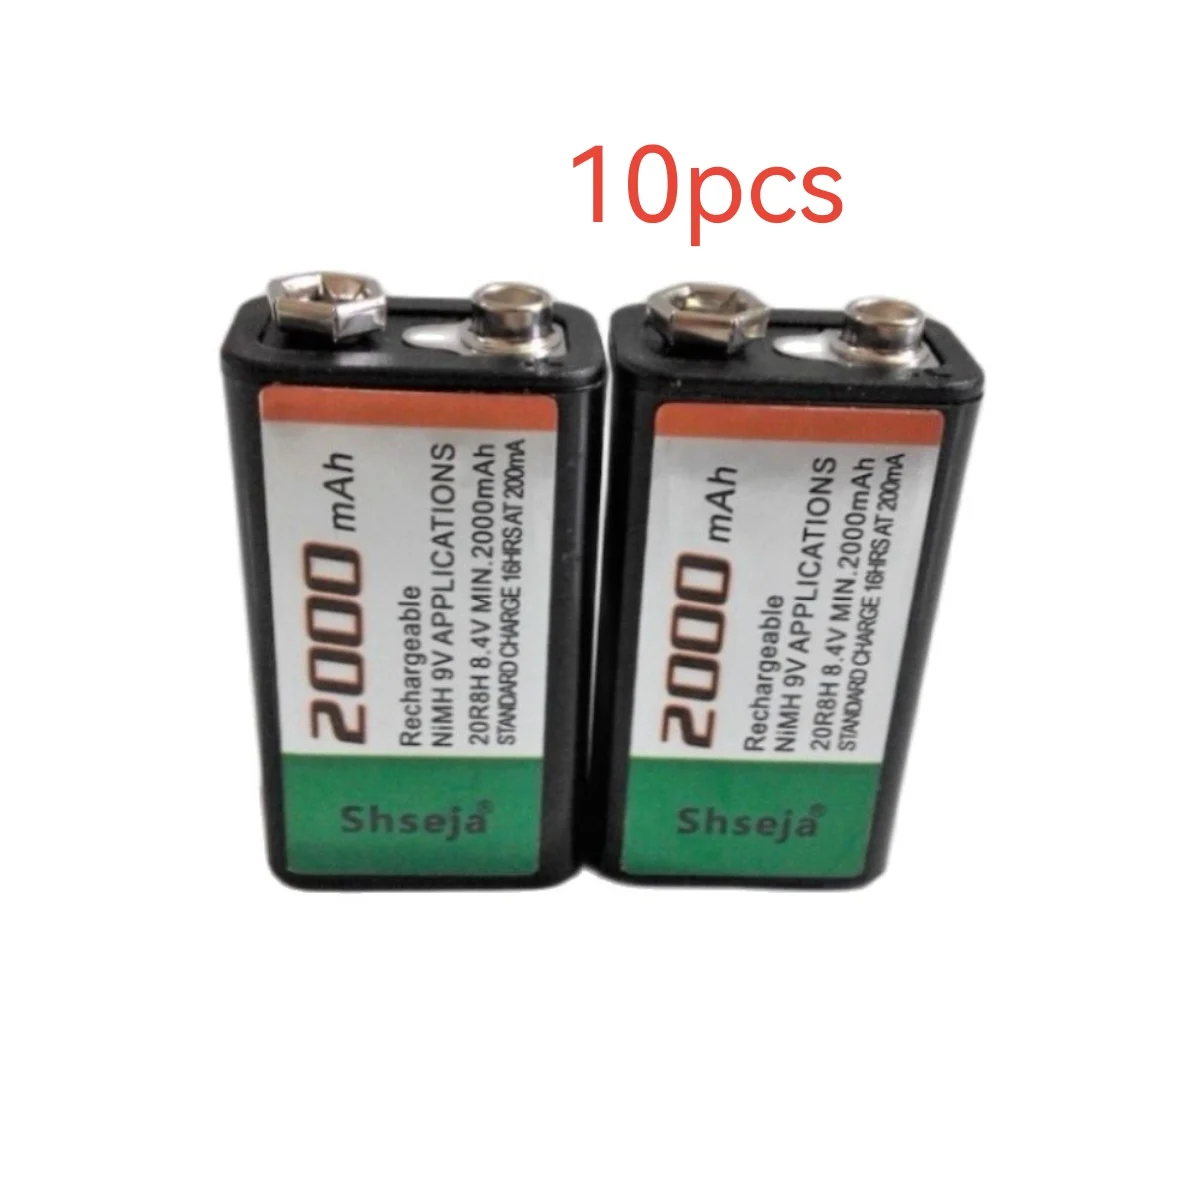 

SHSEJA 10pcs/lot 2000mAh 9V rechargeable battery 9 volt Ni-MH battery for Microphone